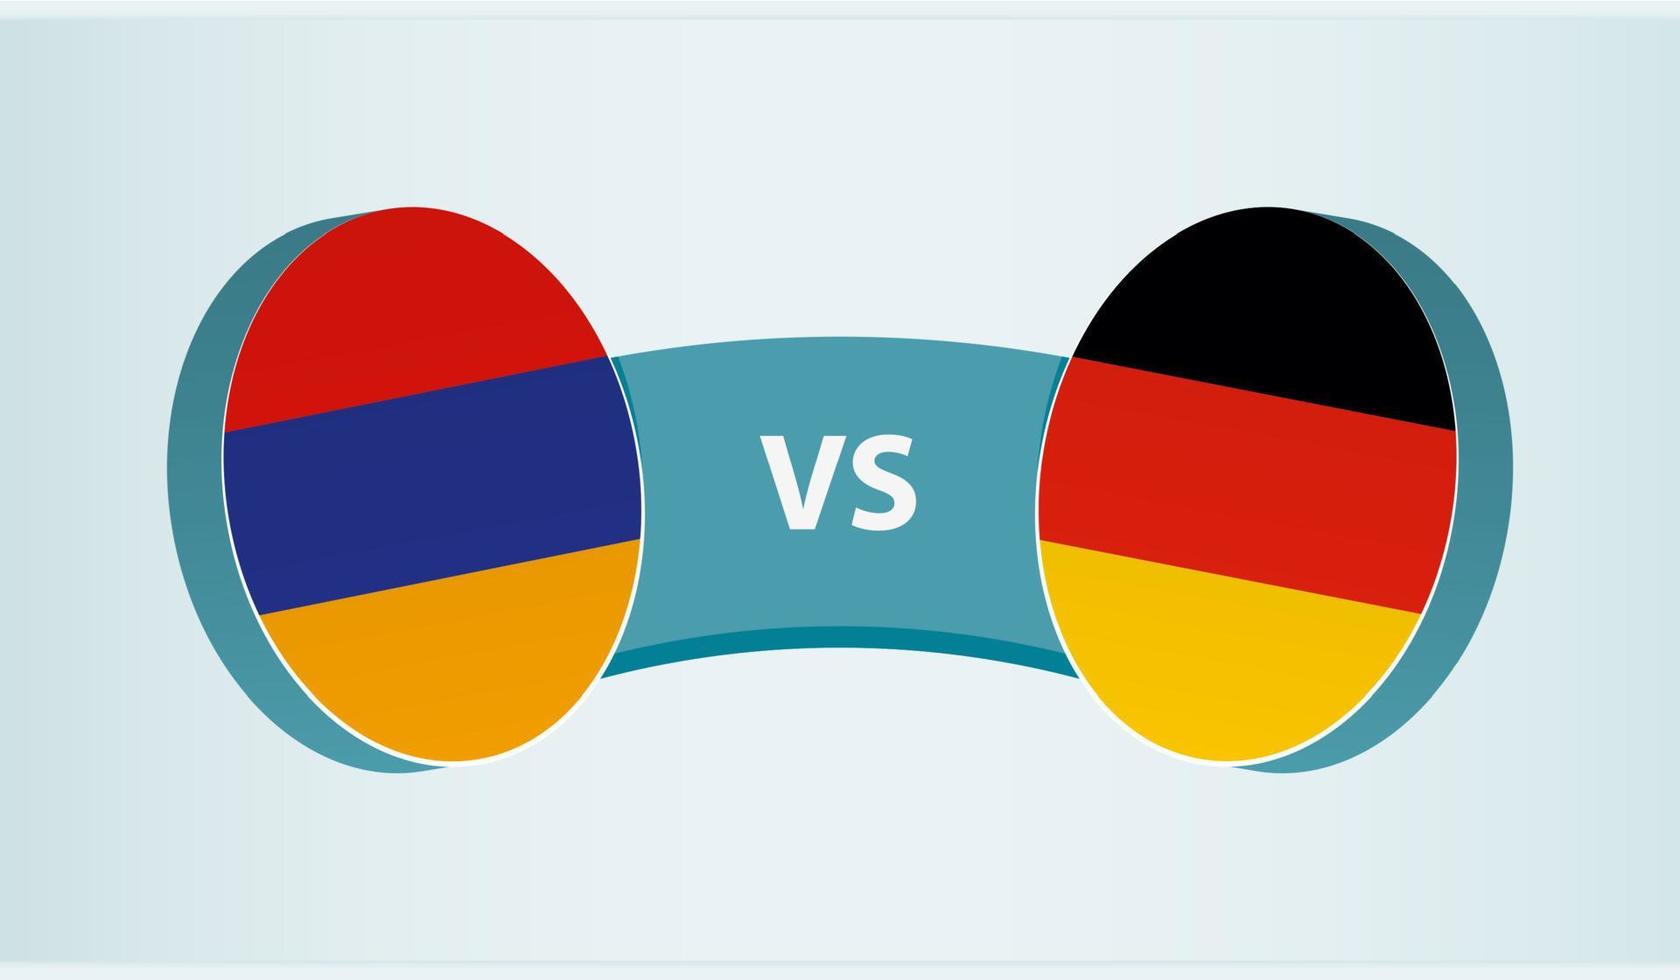 Armenia versus Germany, team sports competition concept. vector